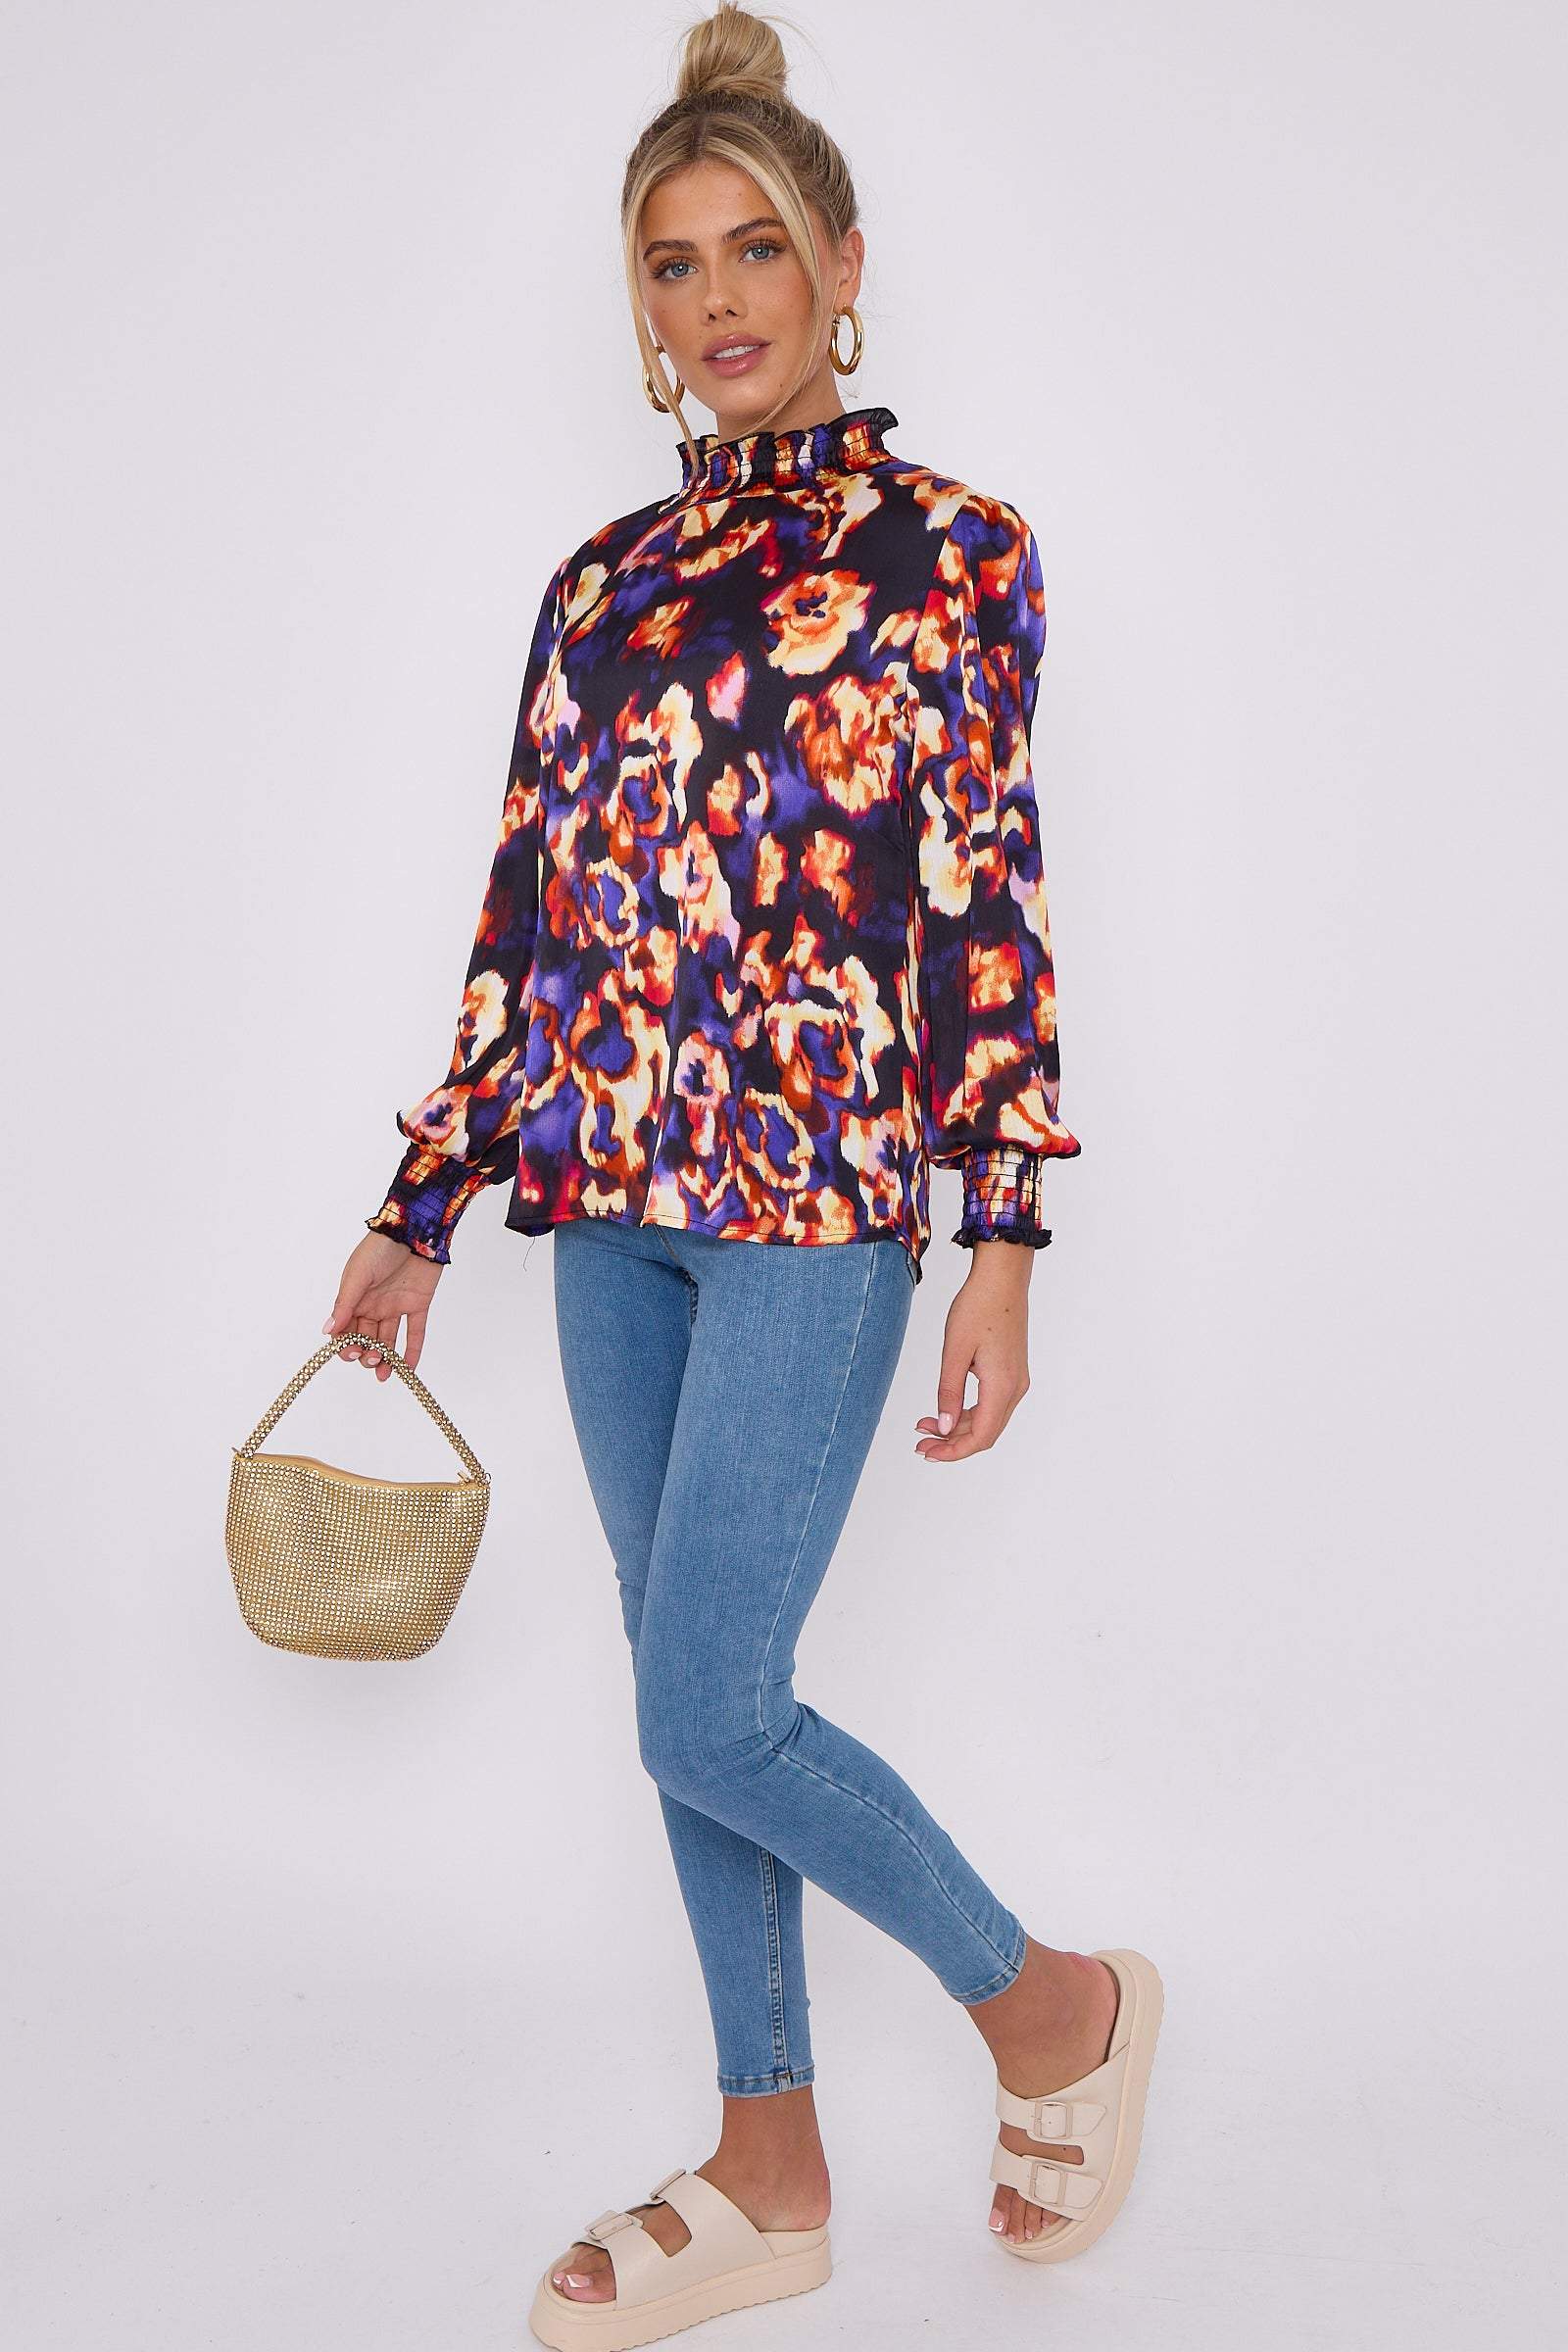 Love Sunshine Purple Abstract Floral Print Satin Chiffon Top Brunch Casual Everyday Garden Party LS-2367 Workwear